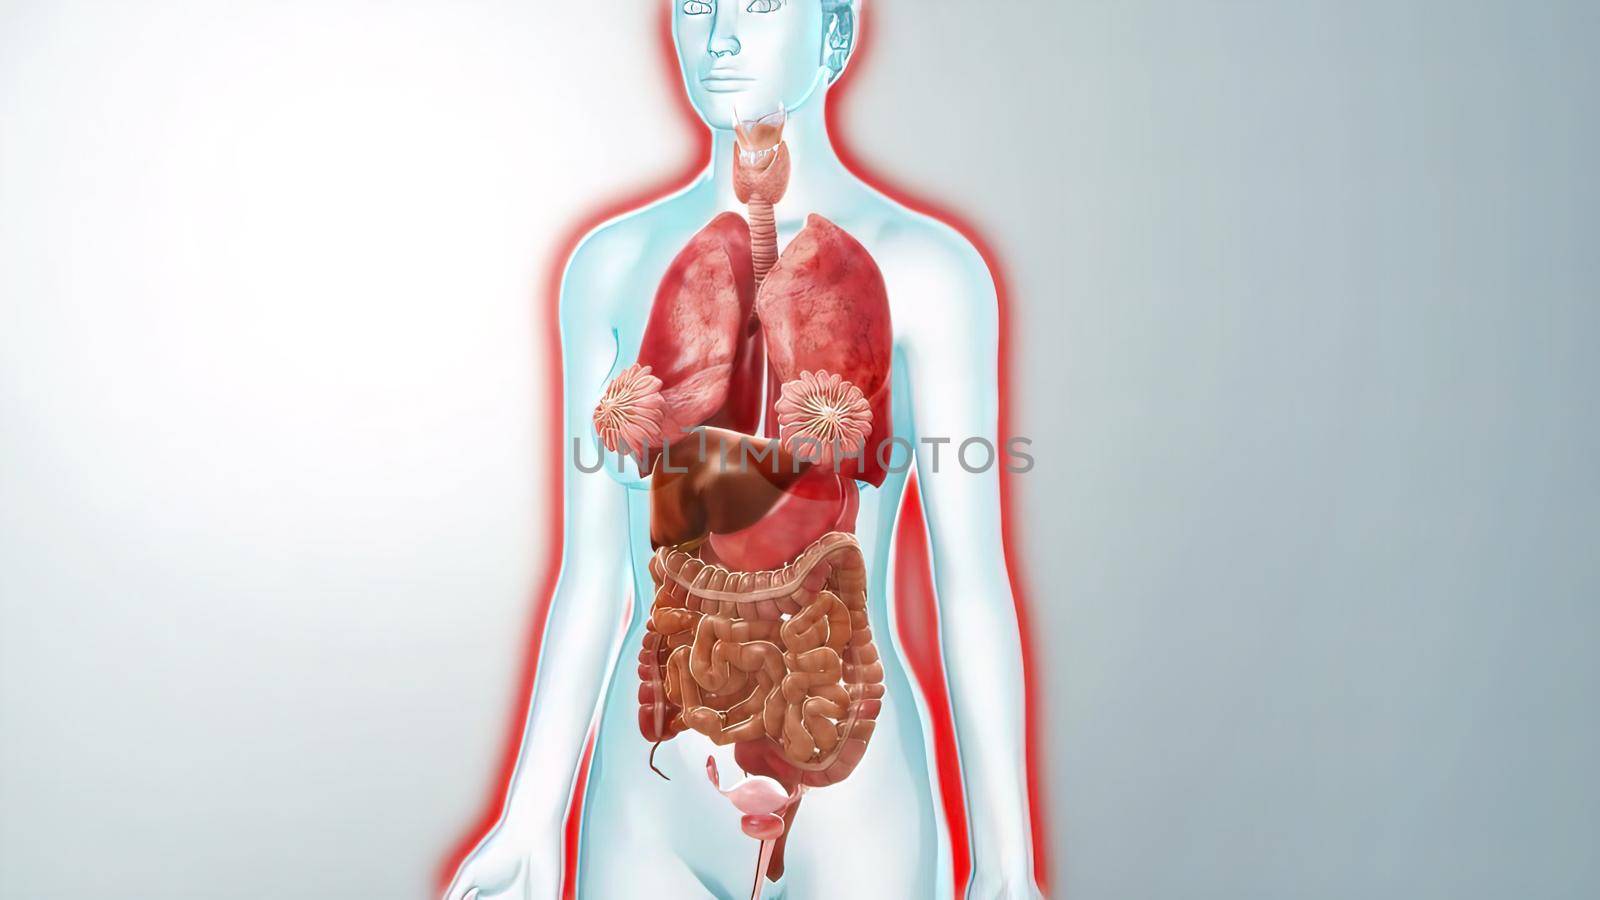 human internal organs Anatomy For Medical Concept 3D Illustration by creativepic